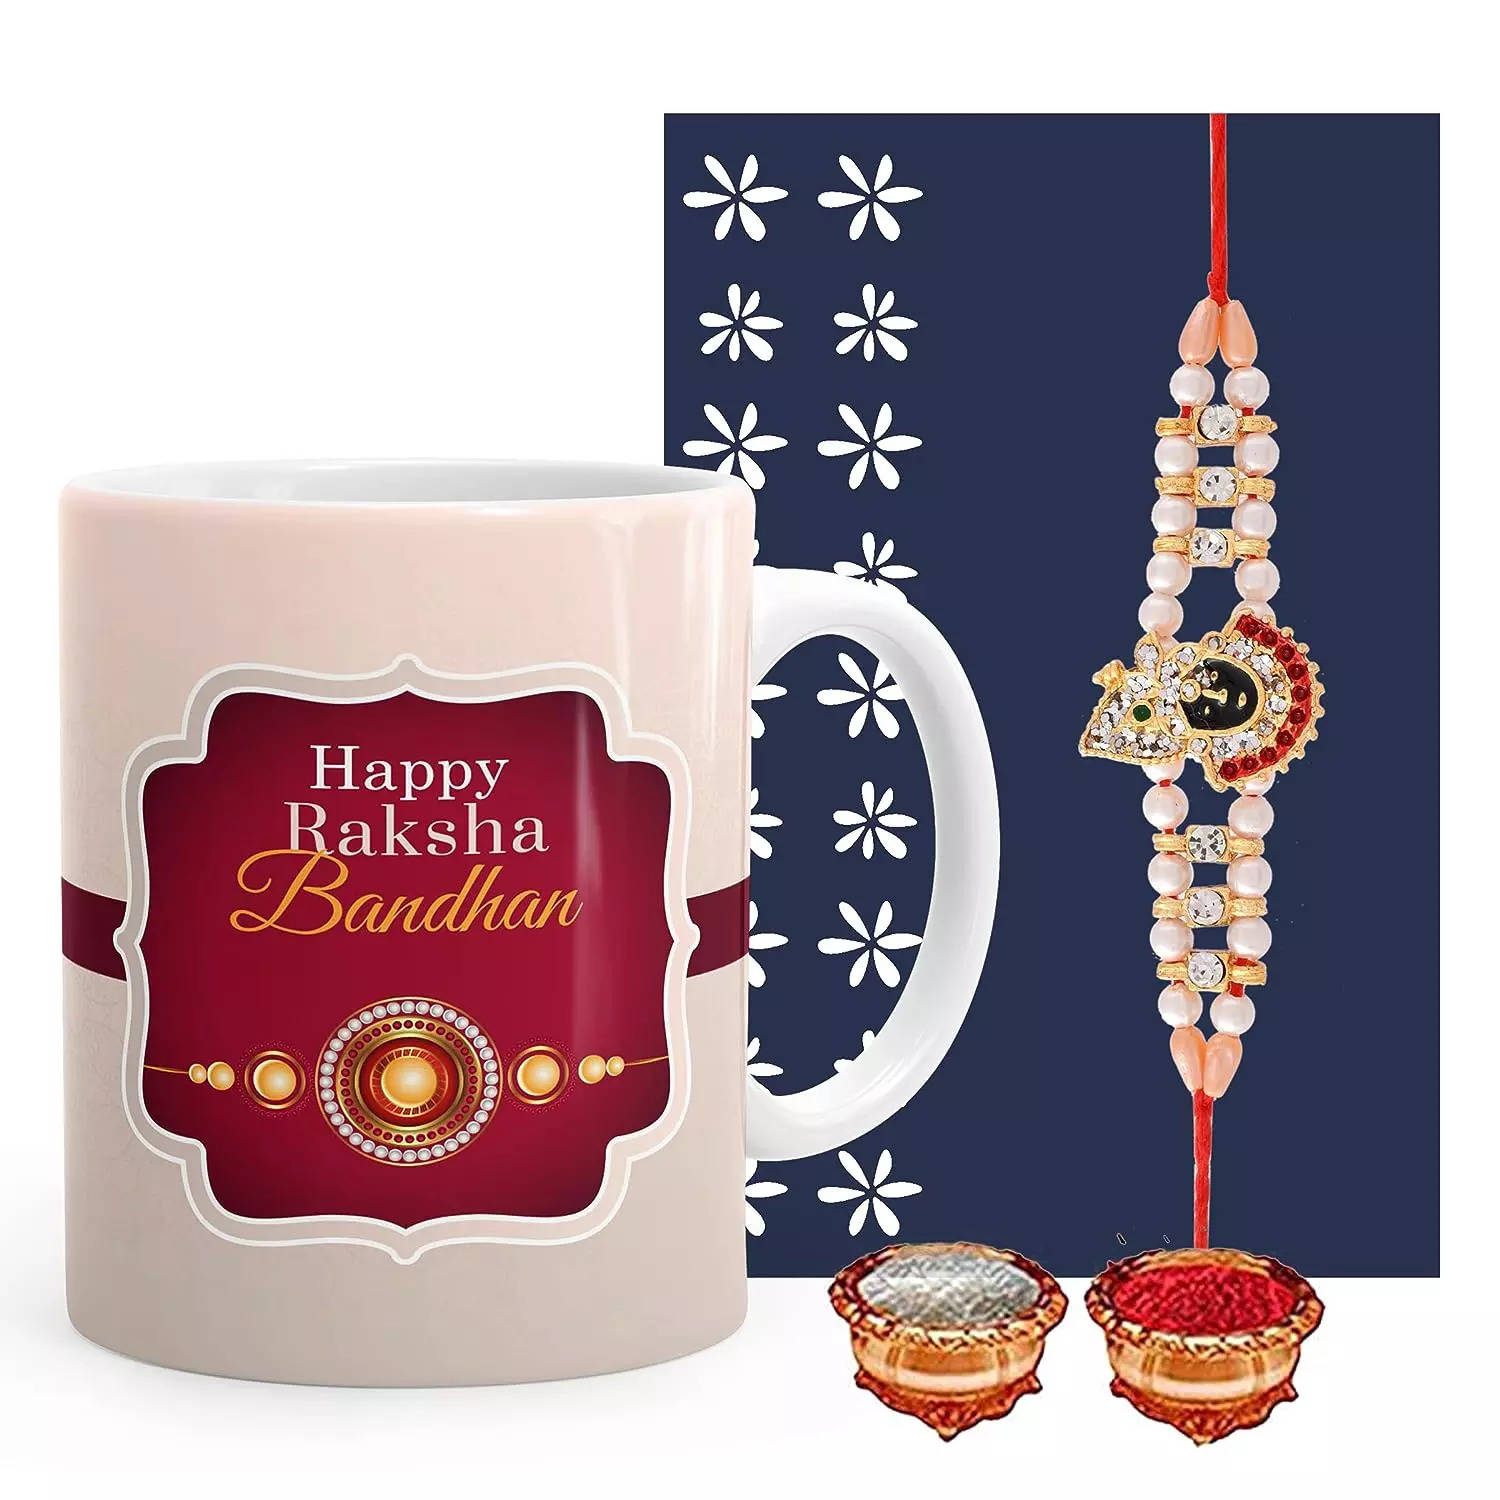 Order and Send Best Online Rakhi Gifts for Sisters from DesiFavors